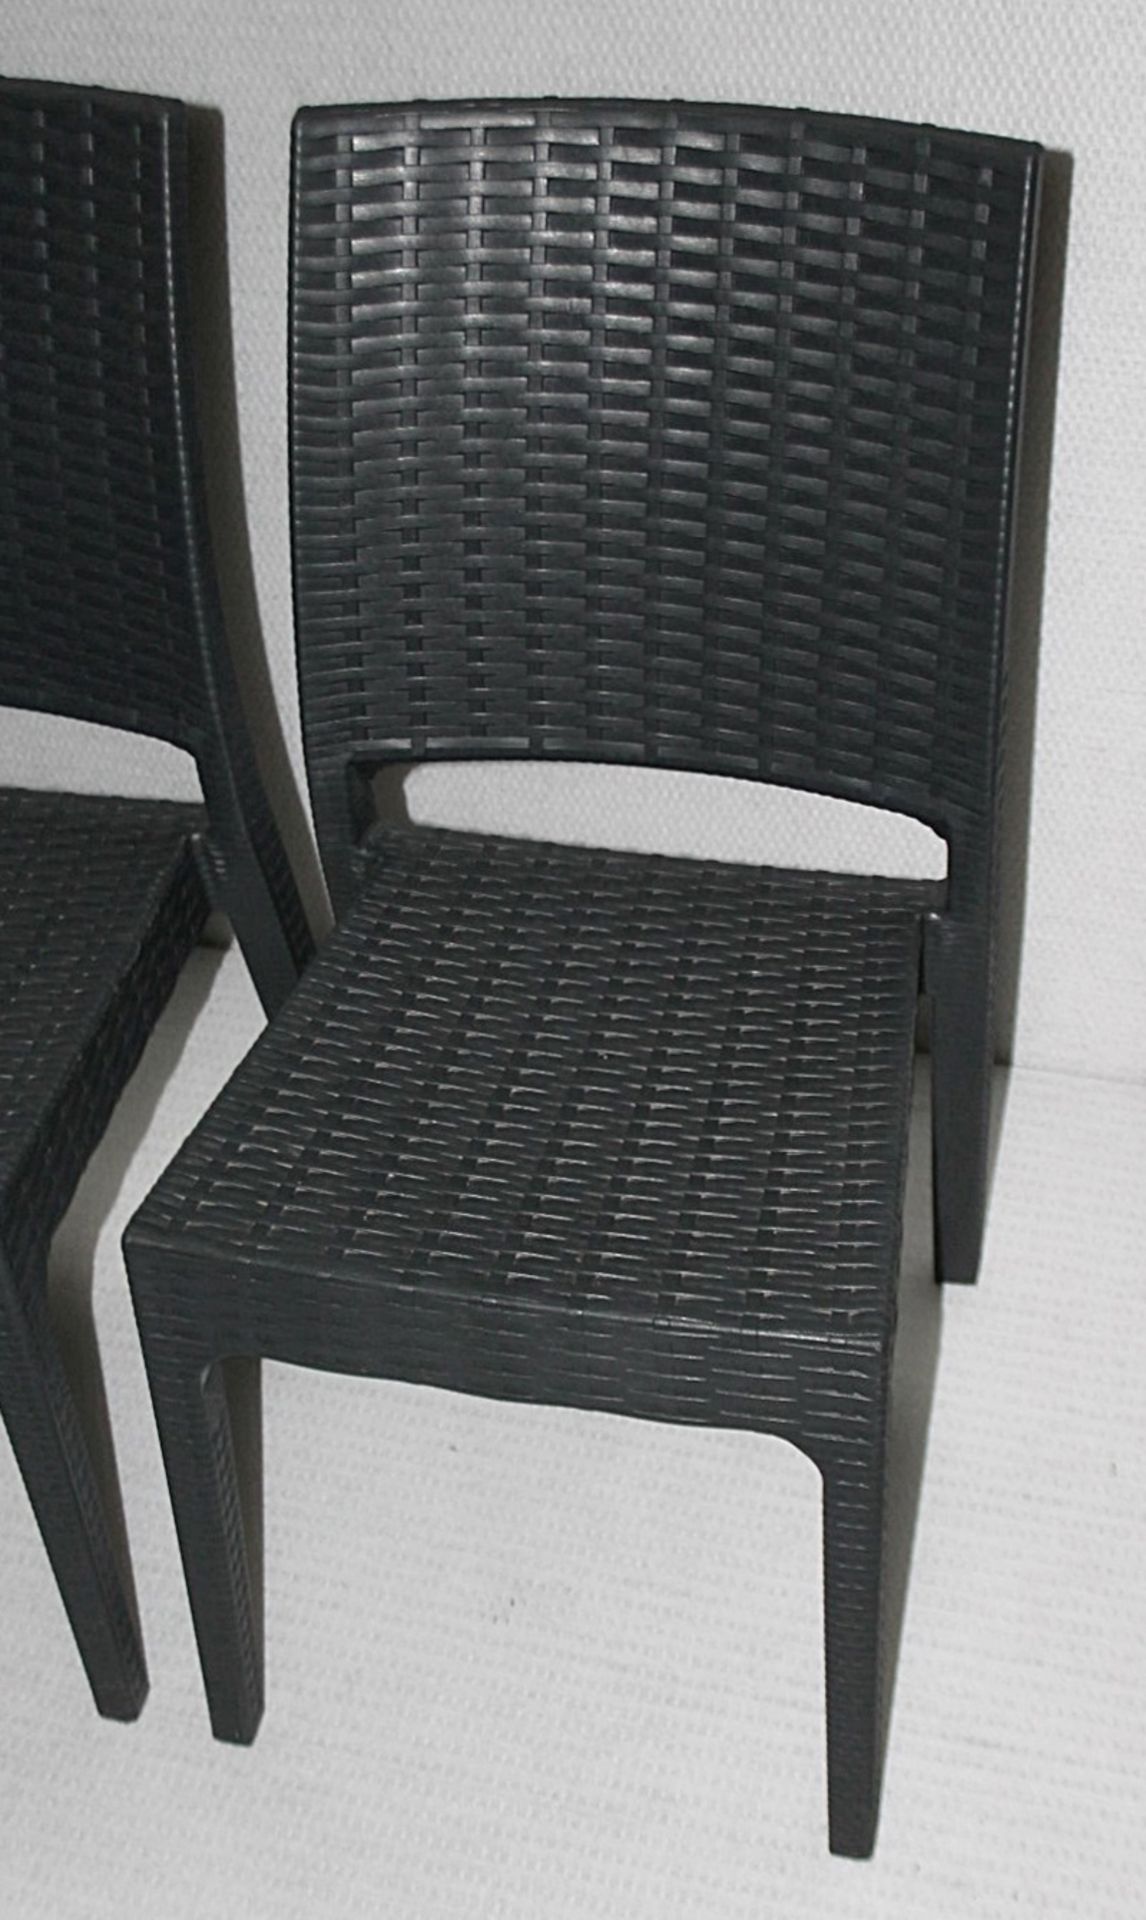 4 x Siesta 'Florida' Rattan Style Garden Chairs In Dark Grey - Suitable For Commercial or Home Use - - Image 14 of 14